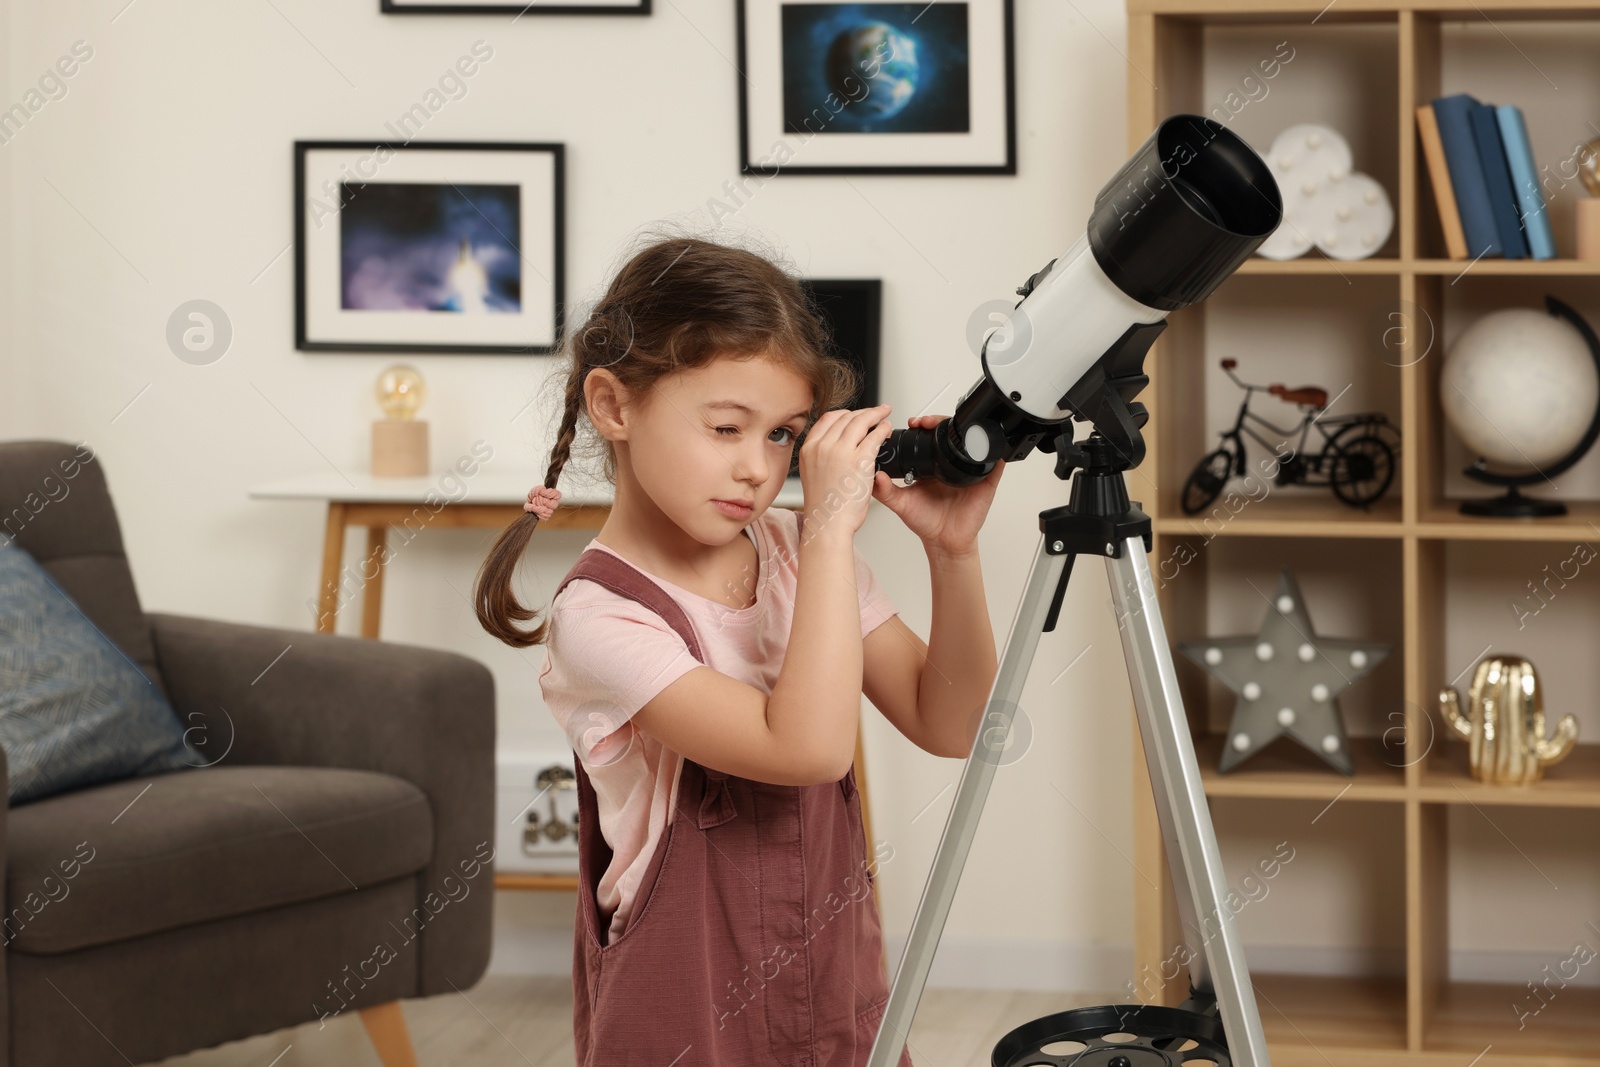 Photo of Cute little girl looking at stars through telescope in room